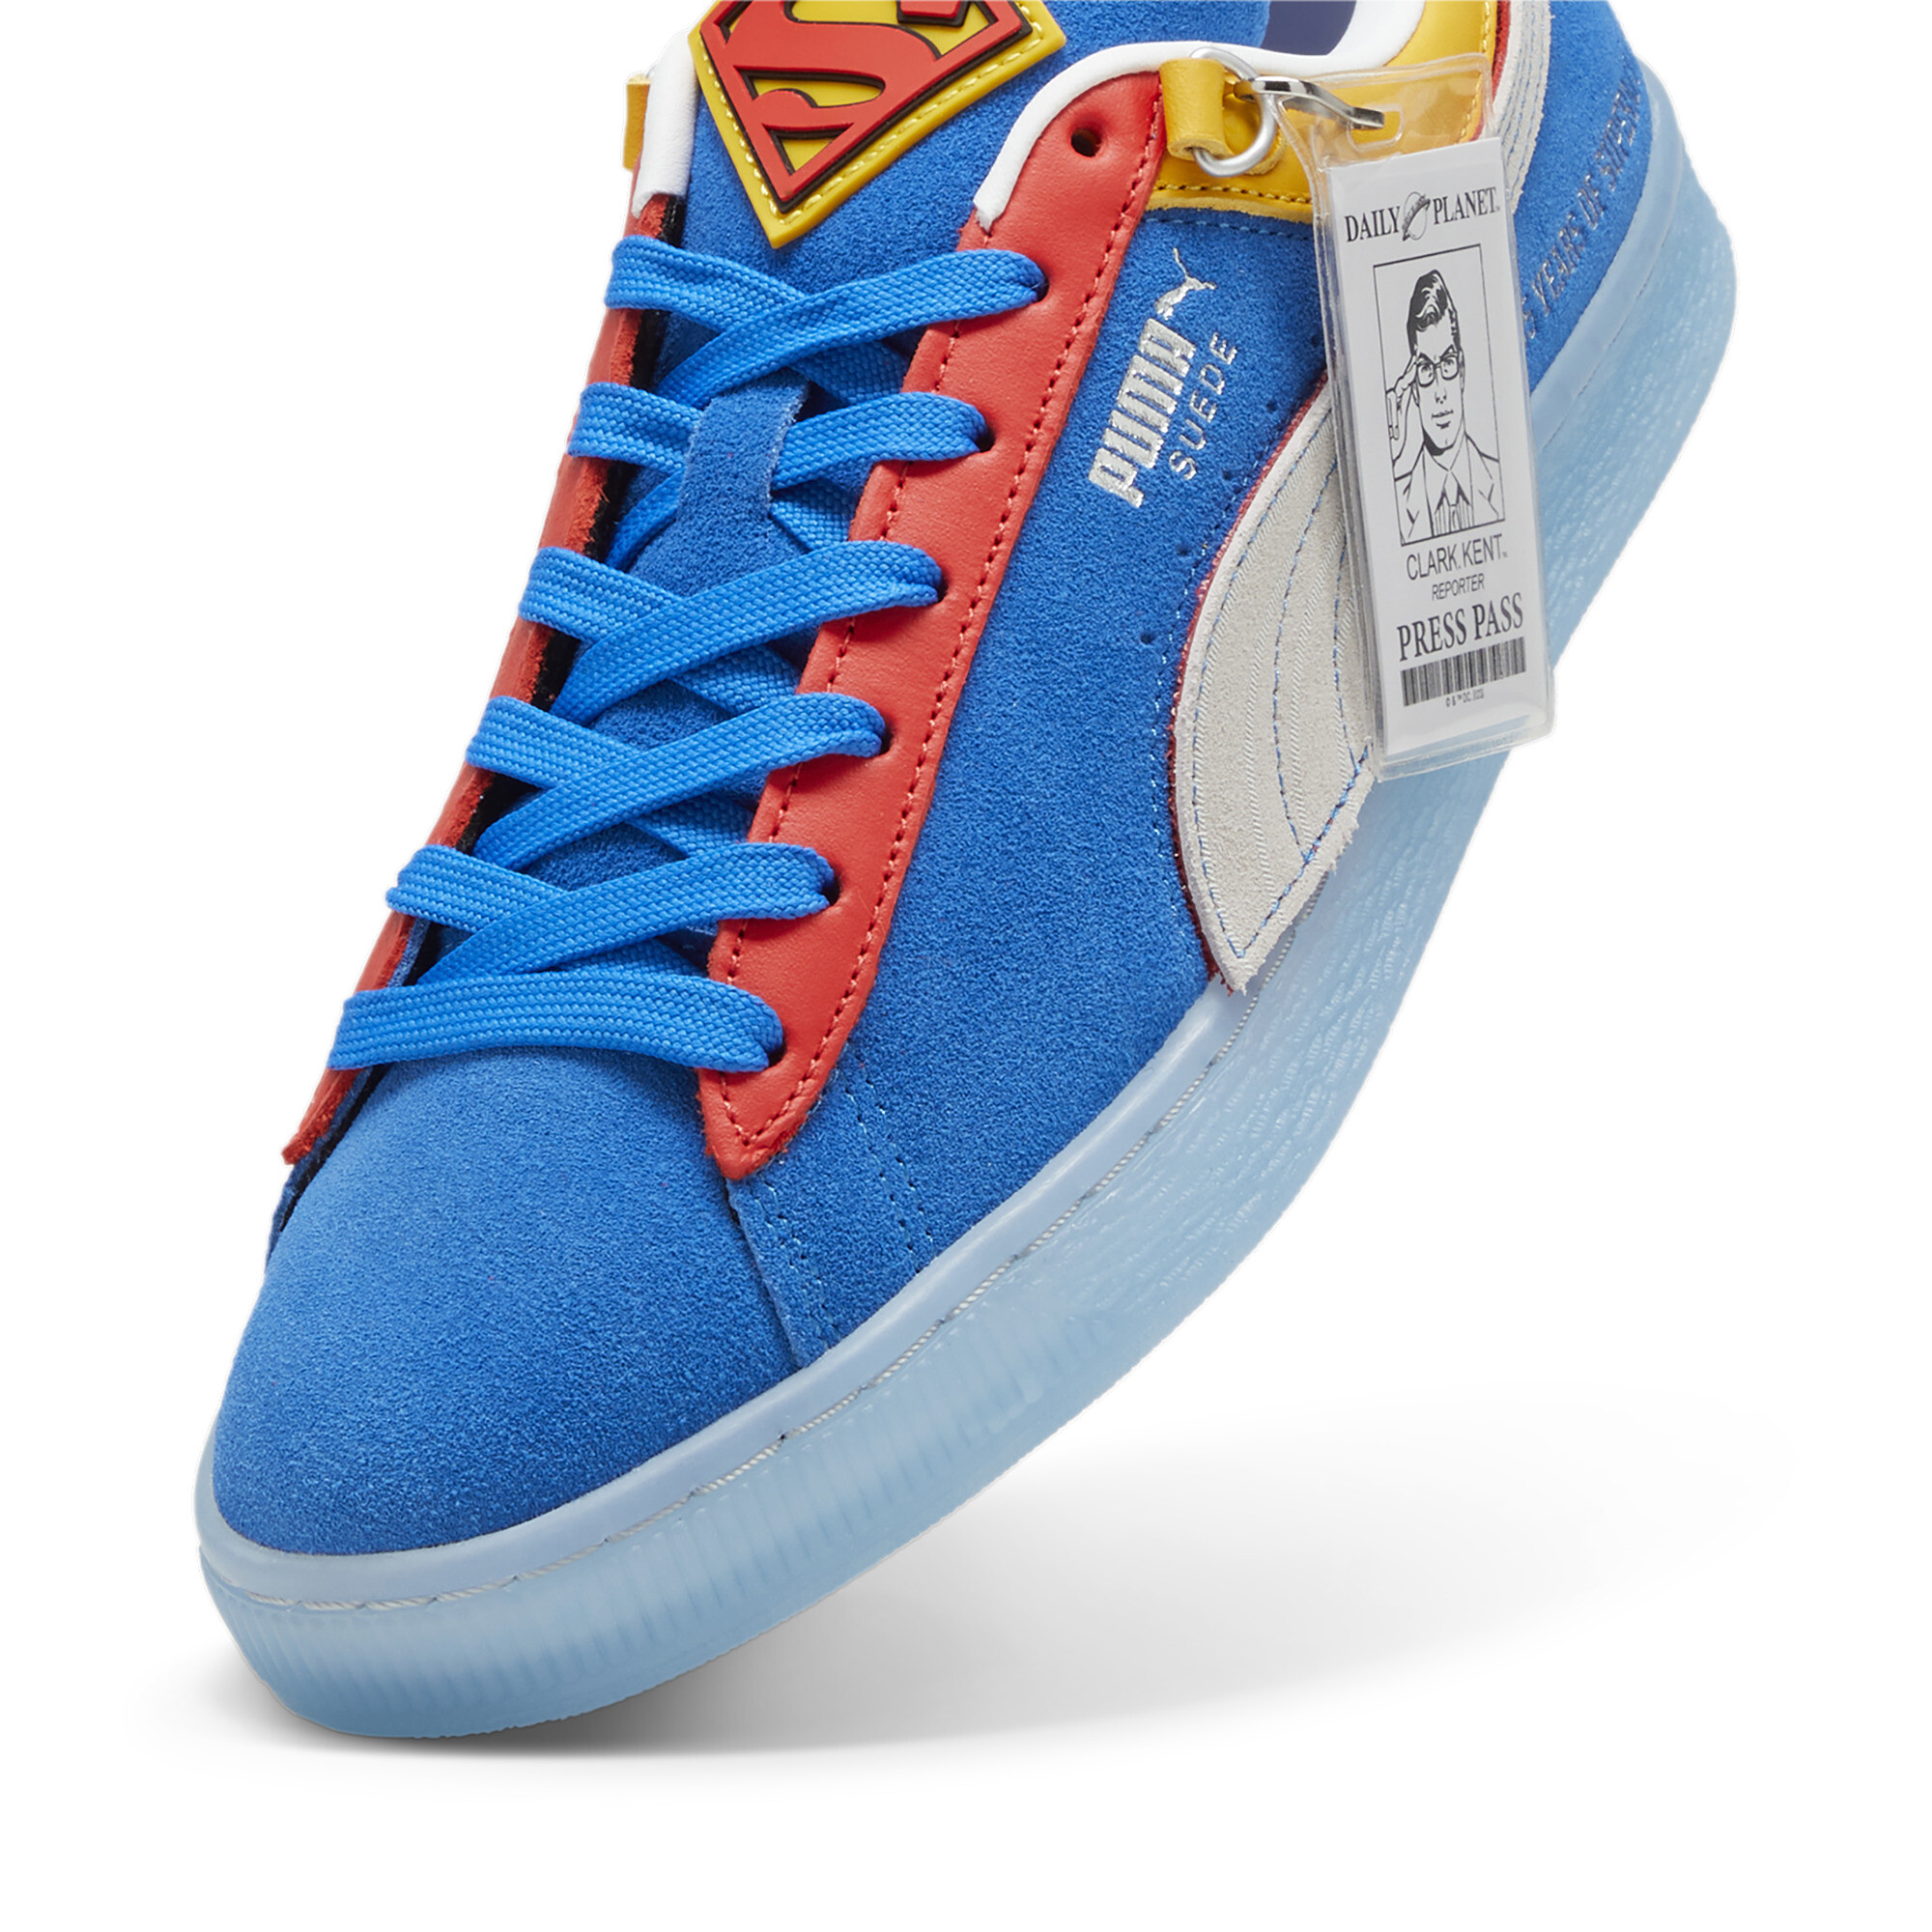 Puma X SUPERMAN 85th Anniversary Suede Sneakers, Blue, Size 42, Shoes